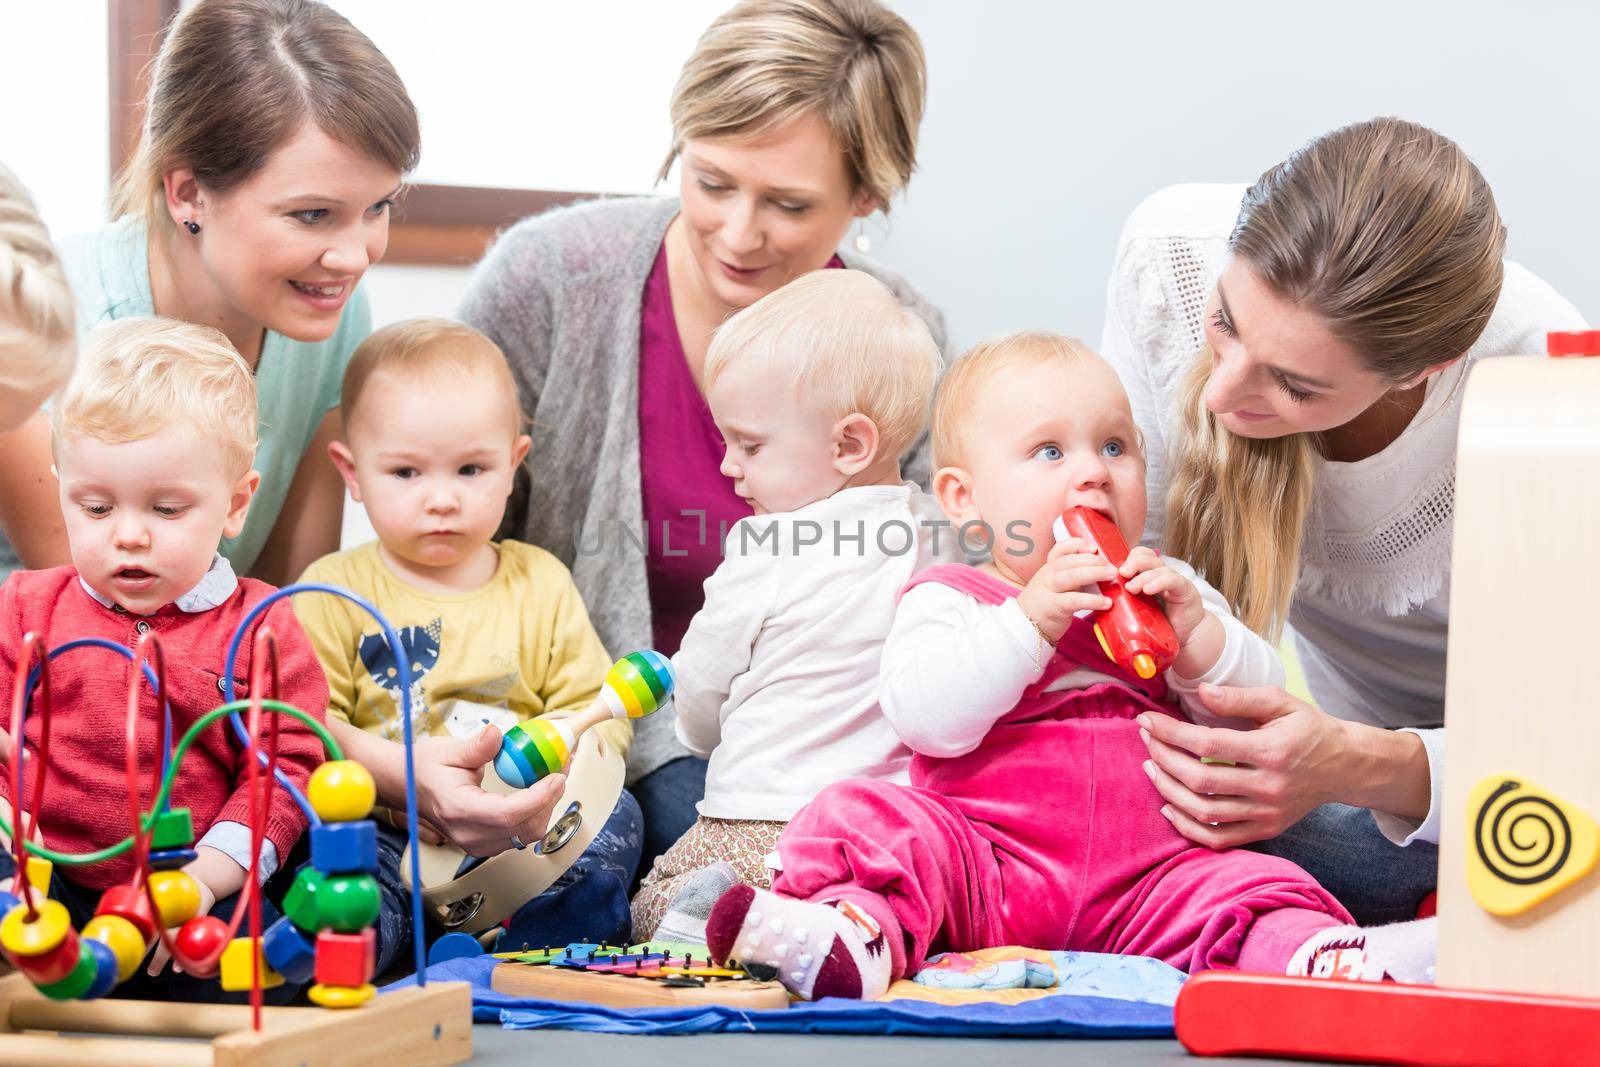 Three dedicated and happy young mothers sitting together on the floor, while watching their babies playing with safe multicolored toys at a modern playground for infants